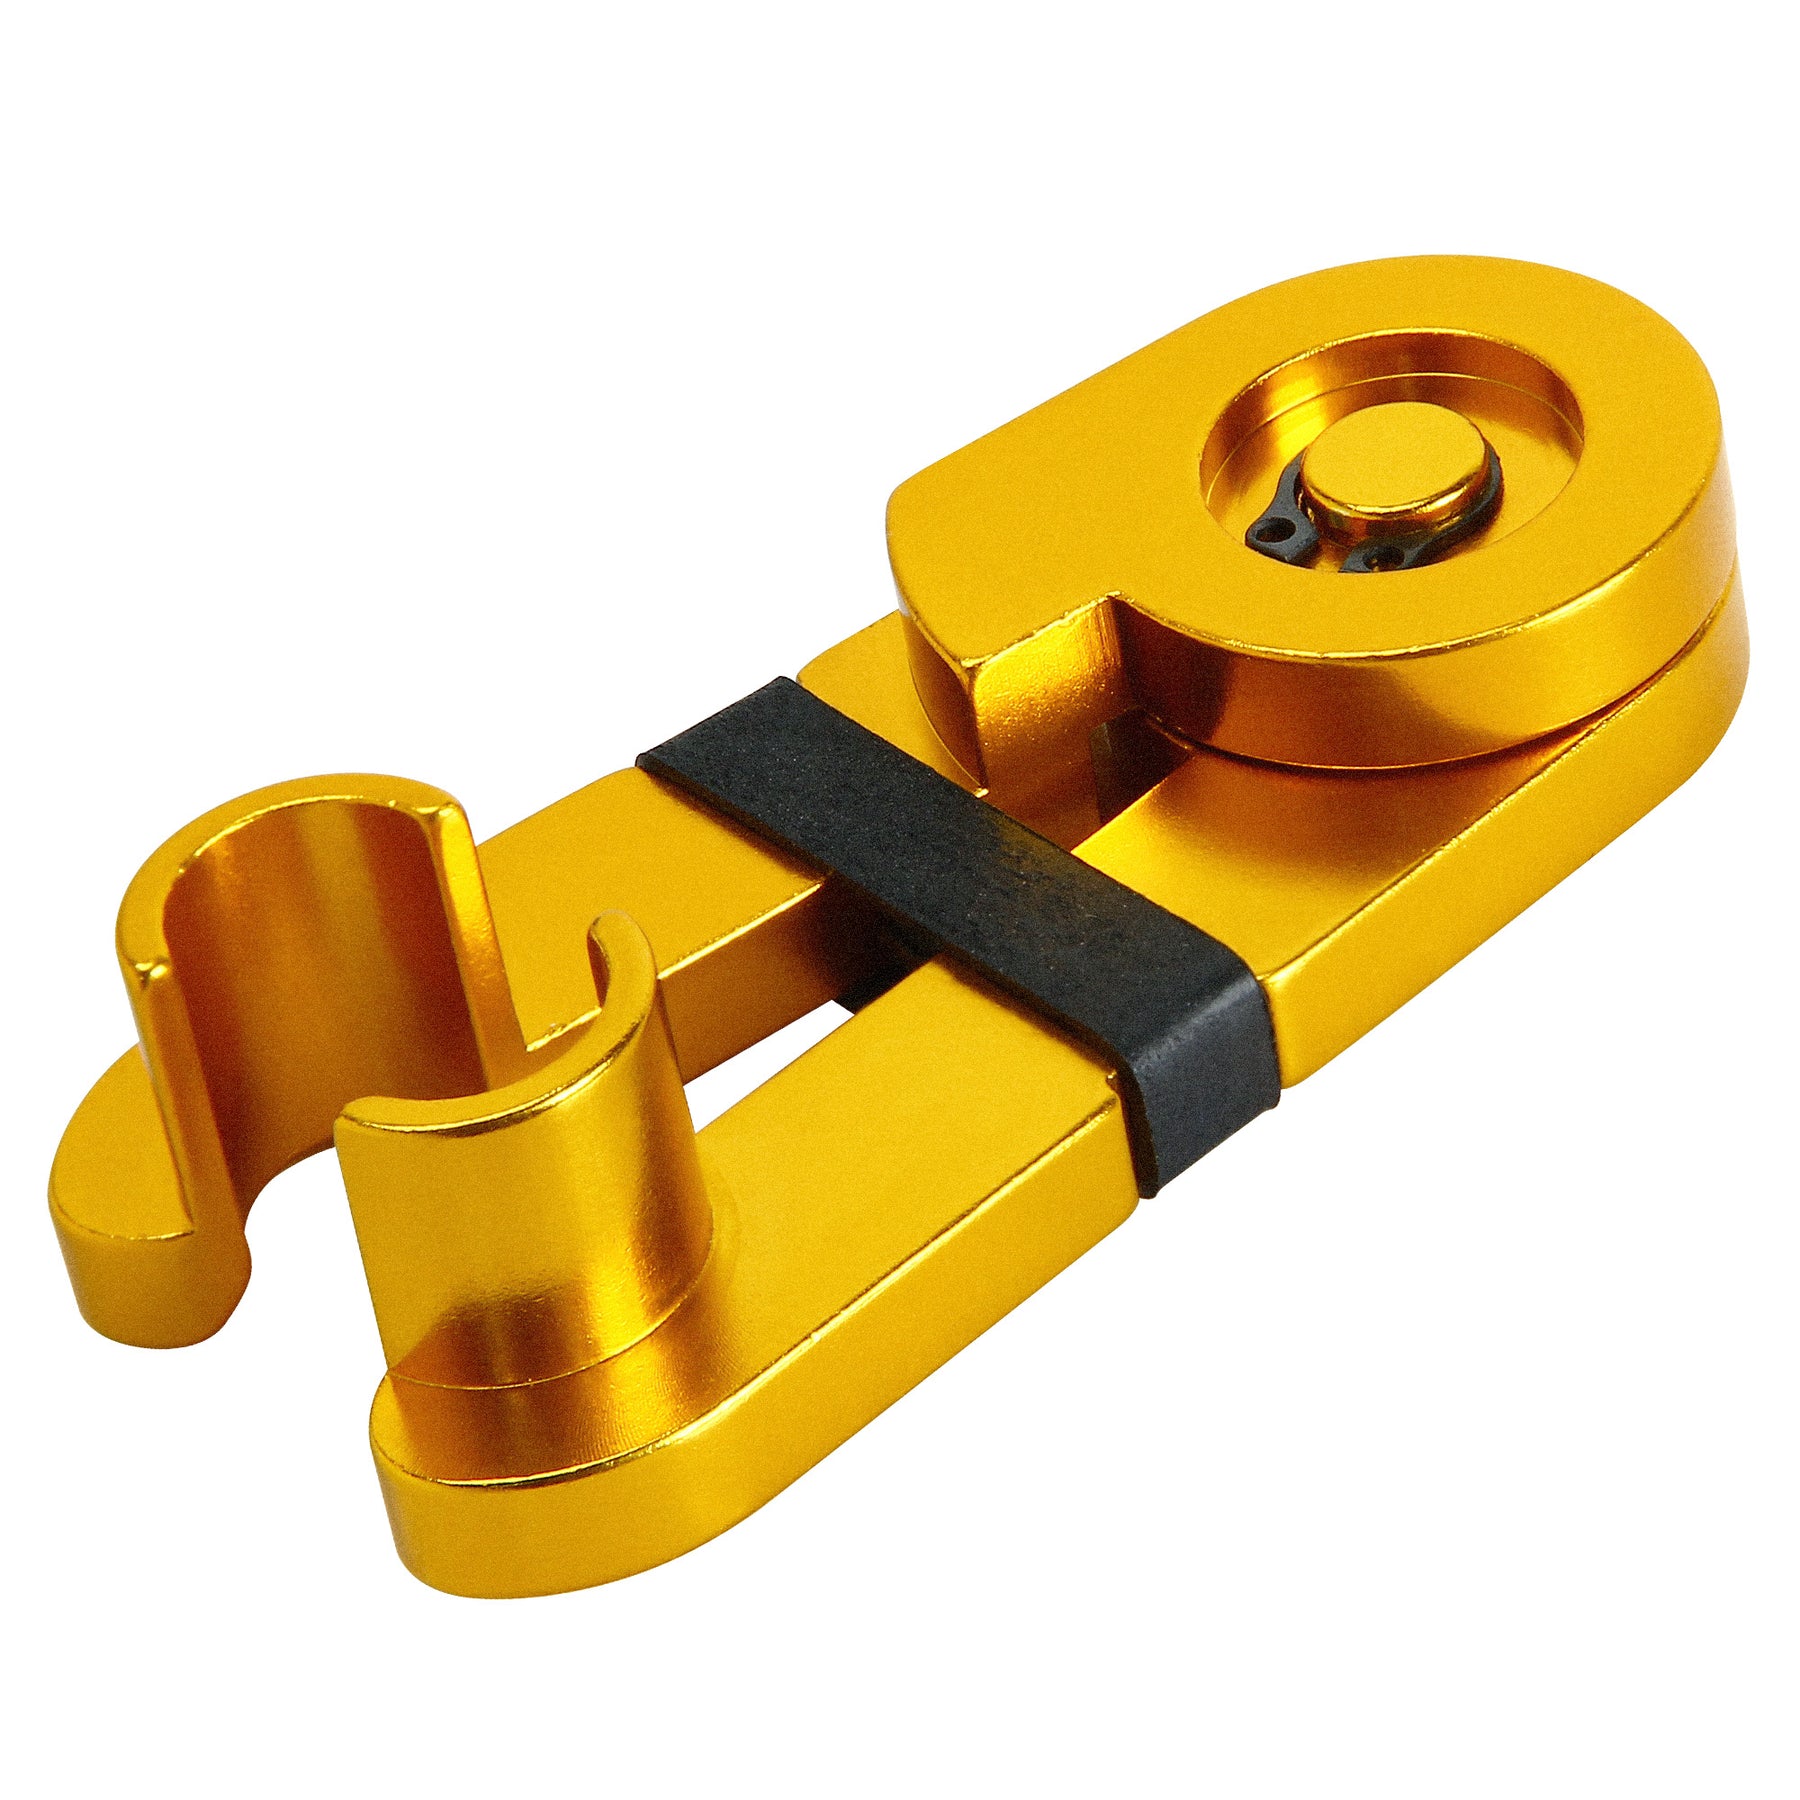 3/8" Fuel & Transmission Line Disconnect Tool